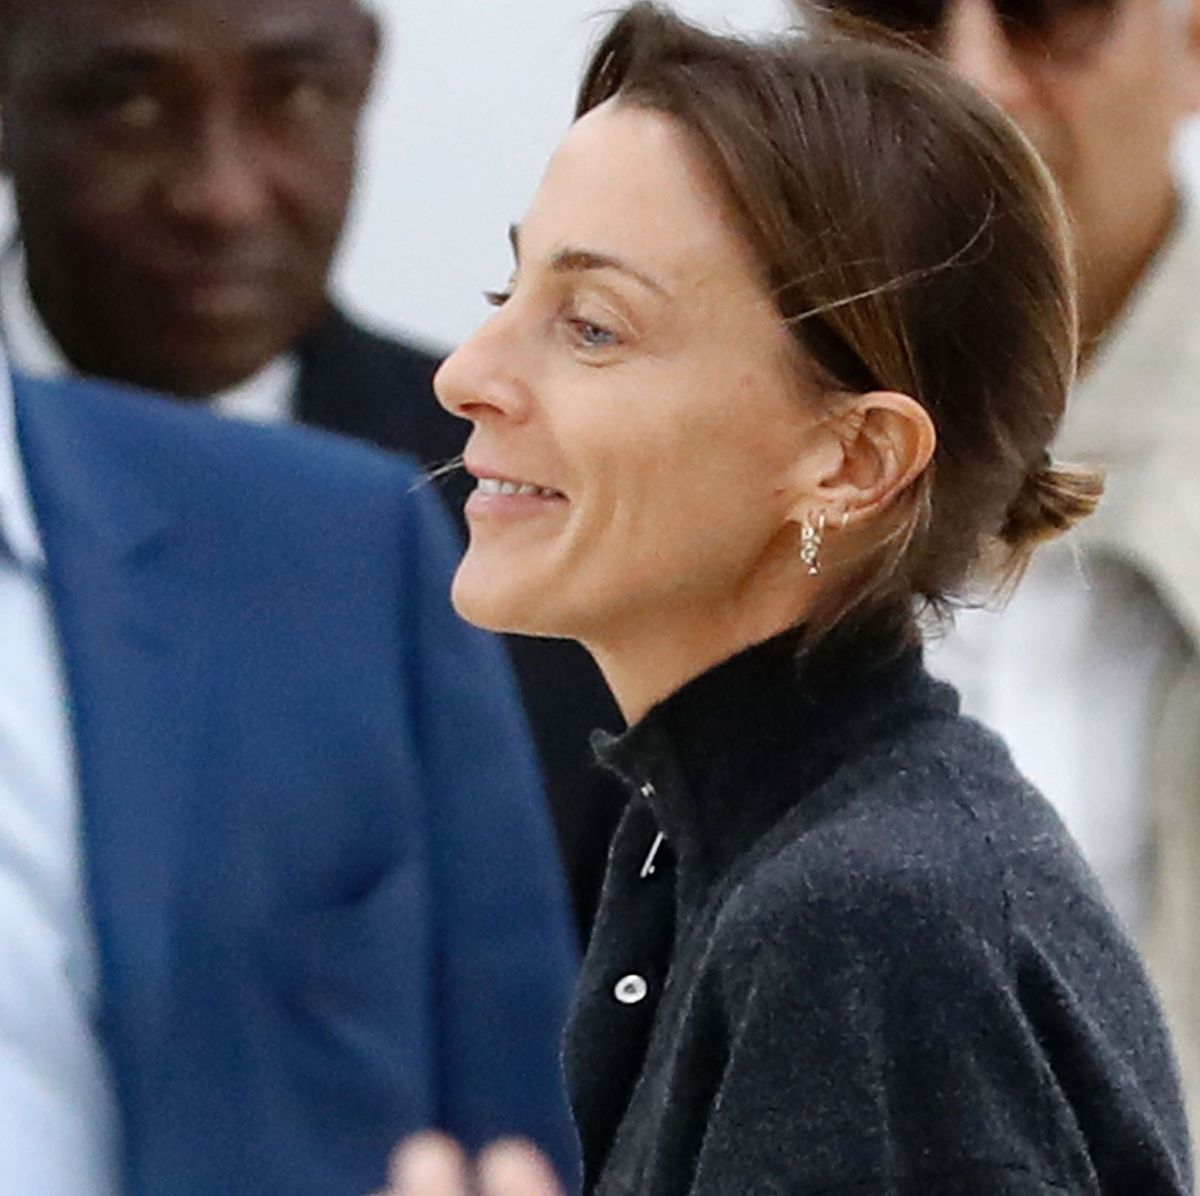 In the chaos of PFW, Phoebe Philo ushers in calm at Céline